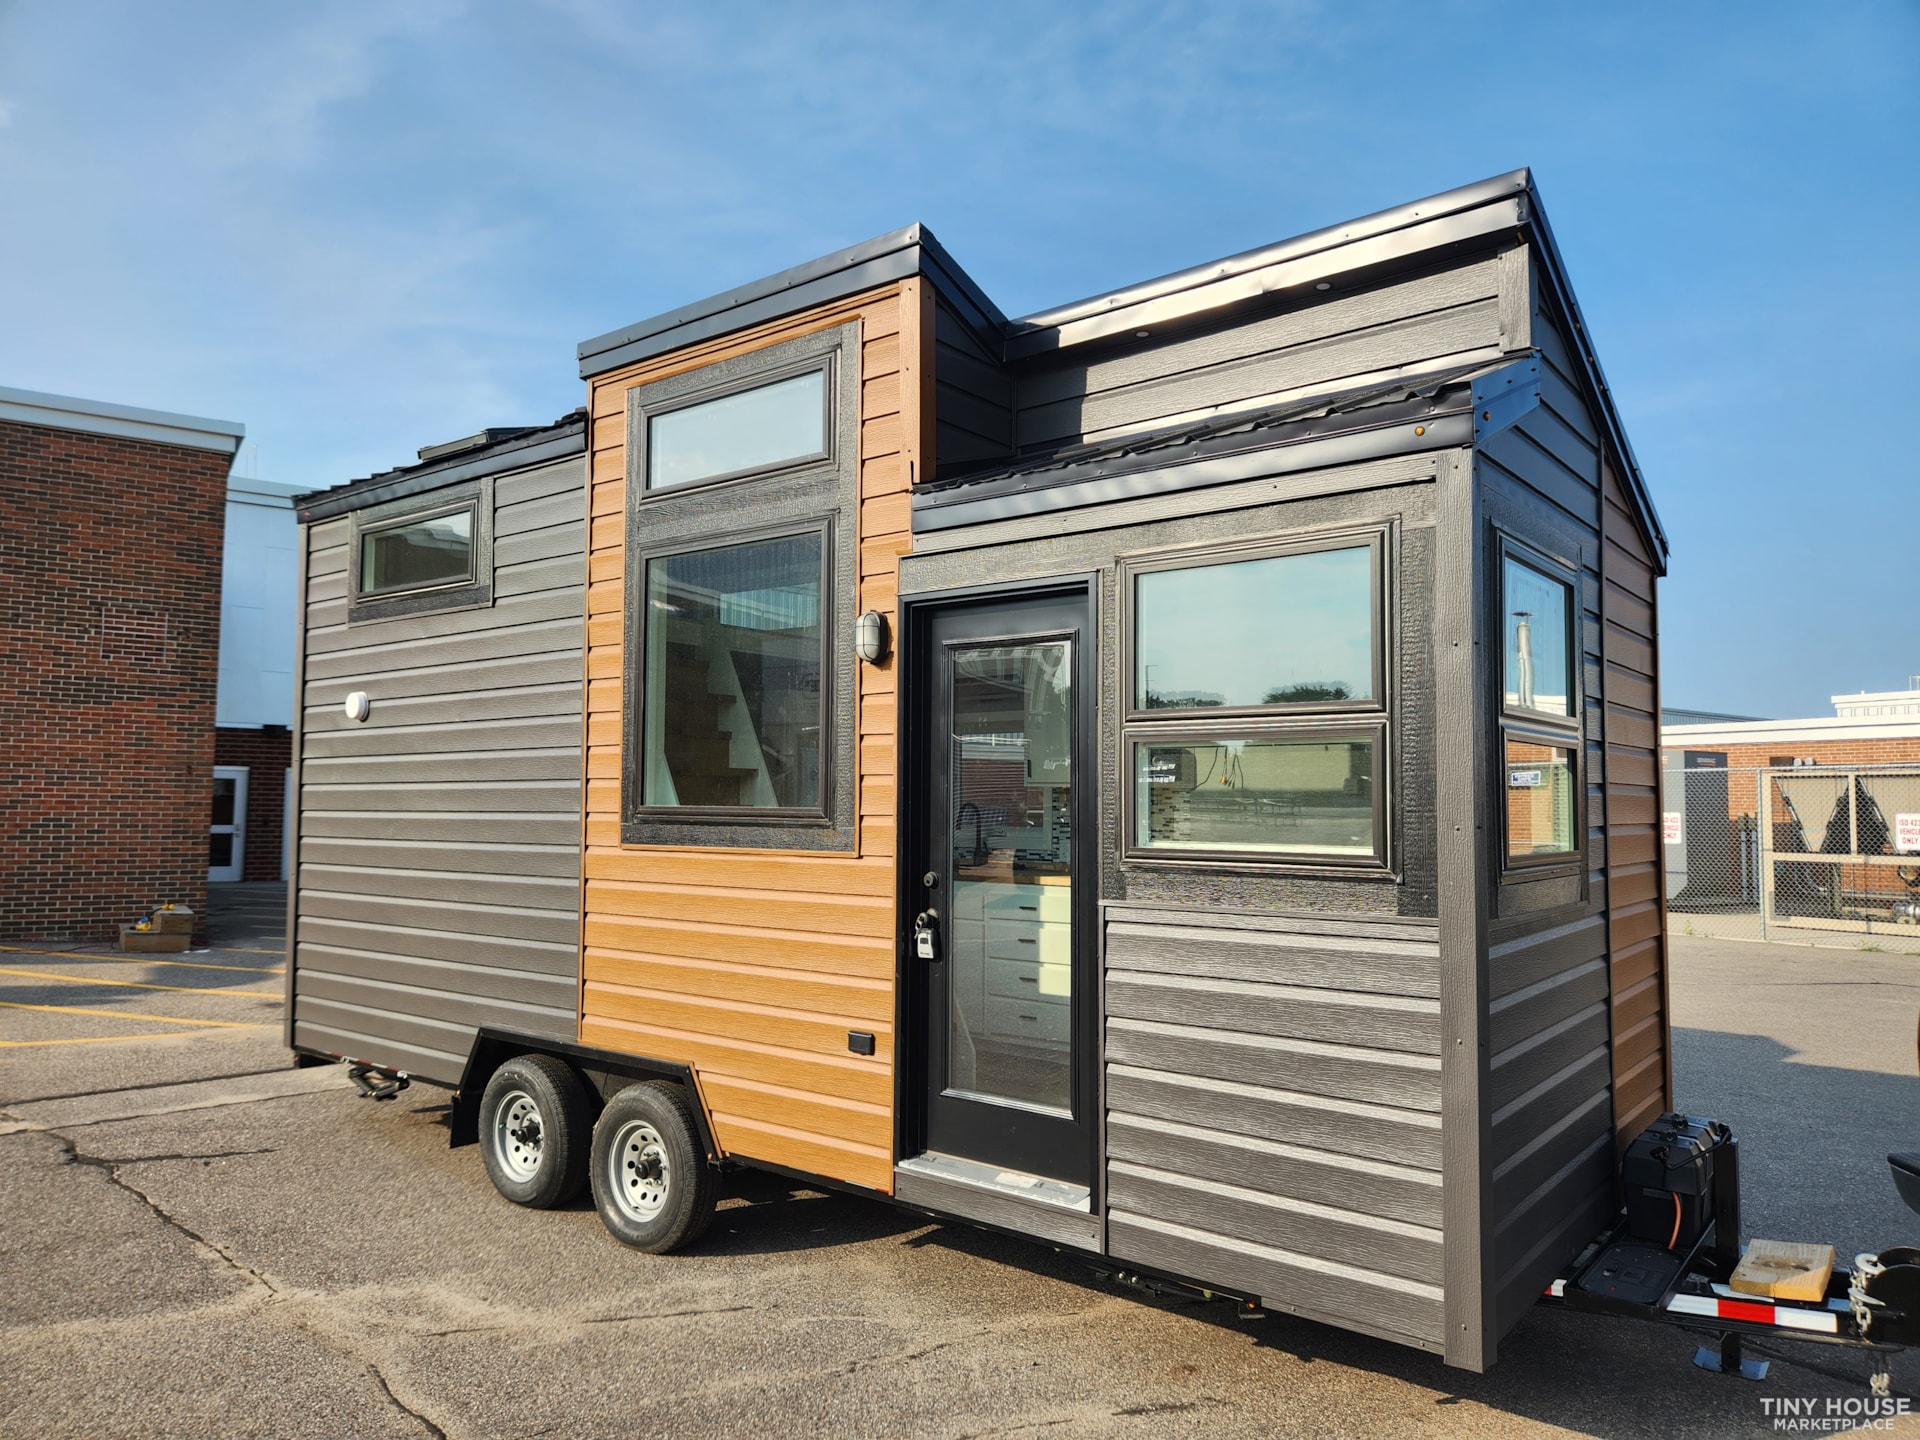 This Off-Grid Tiny Home on wheels is HUGE!